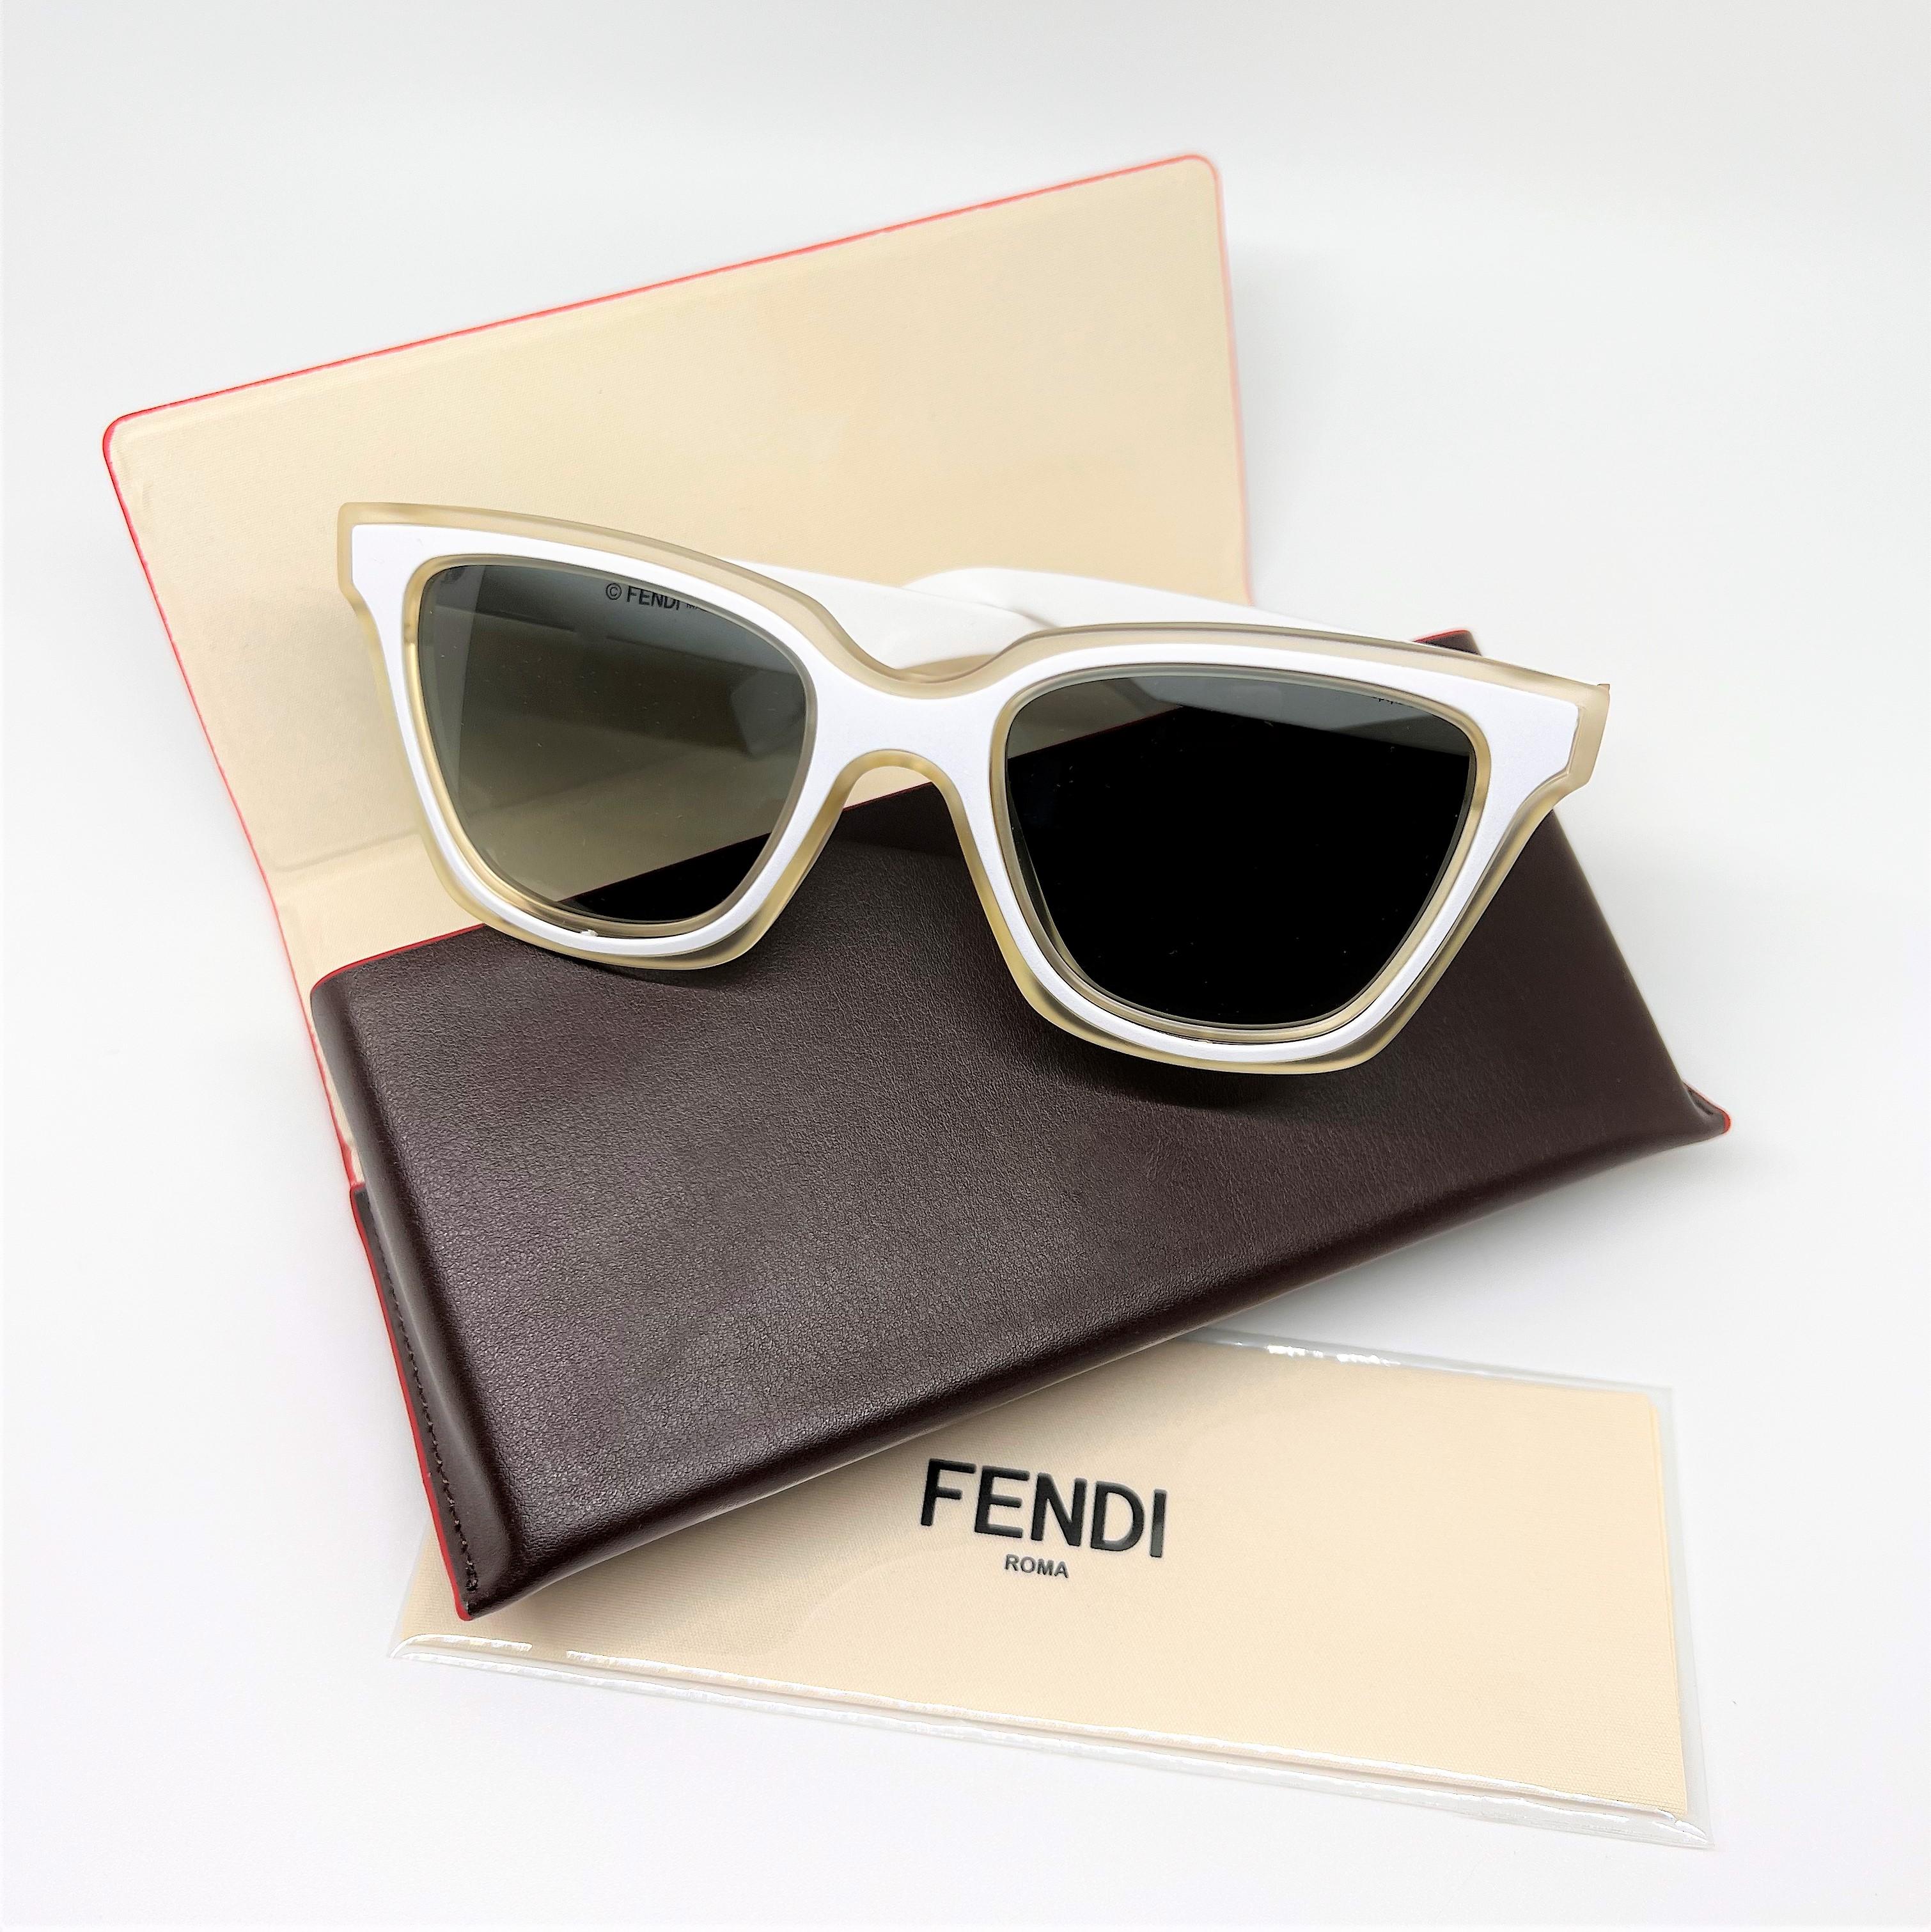 New Fendi White Wayfarer Sunglasses with Case

Brand New
White Wayfarer Sunglasses 
Lightweight Scratch and Impact Resistant
Made in Italy
100% UVA/UVB Protection
Comes with Case & Cleaning Clothing